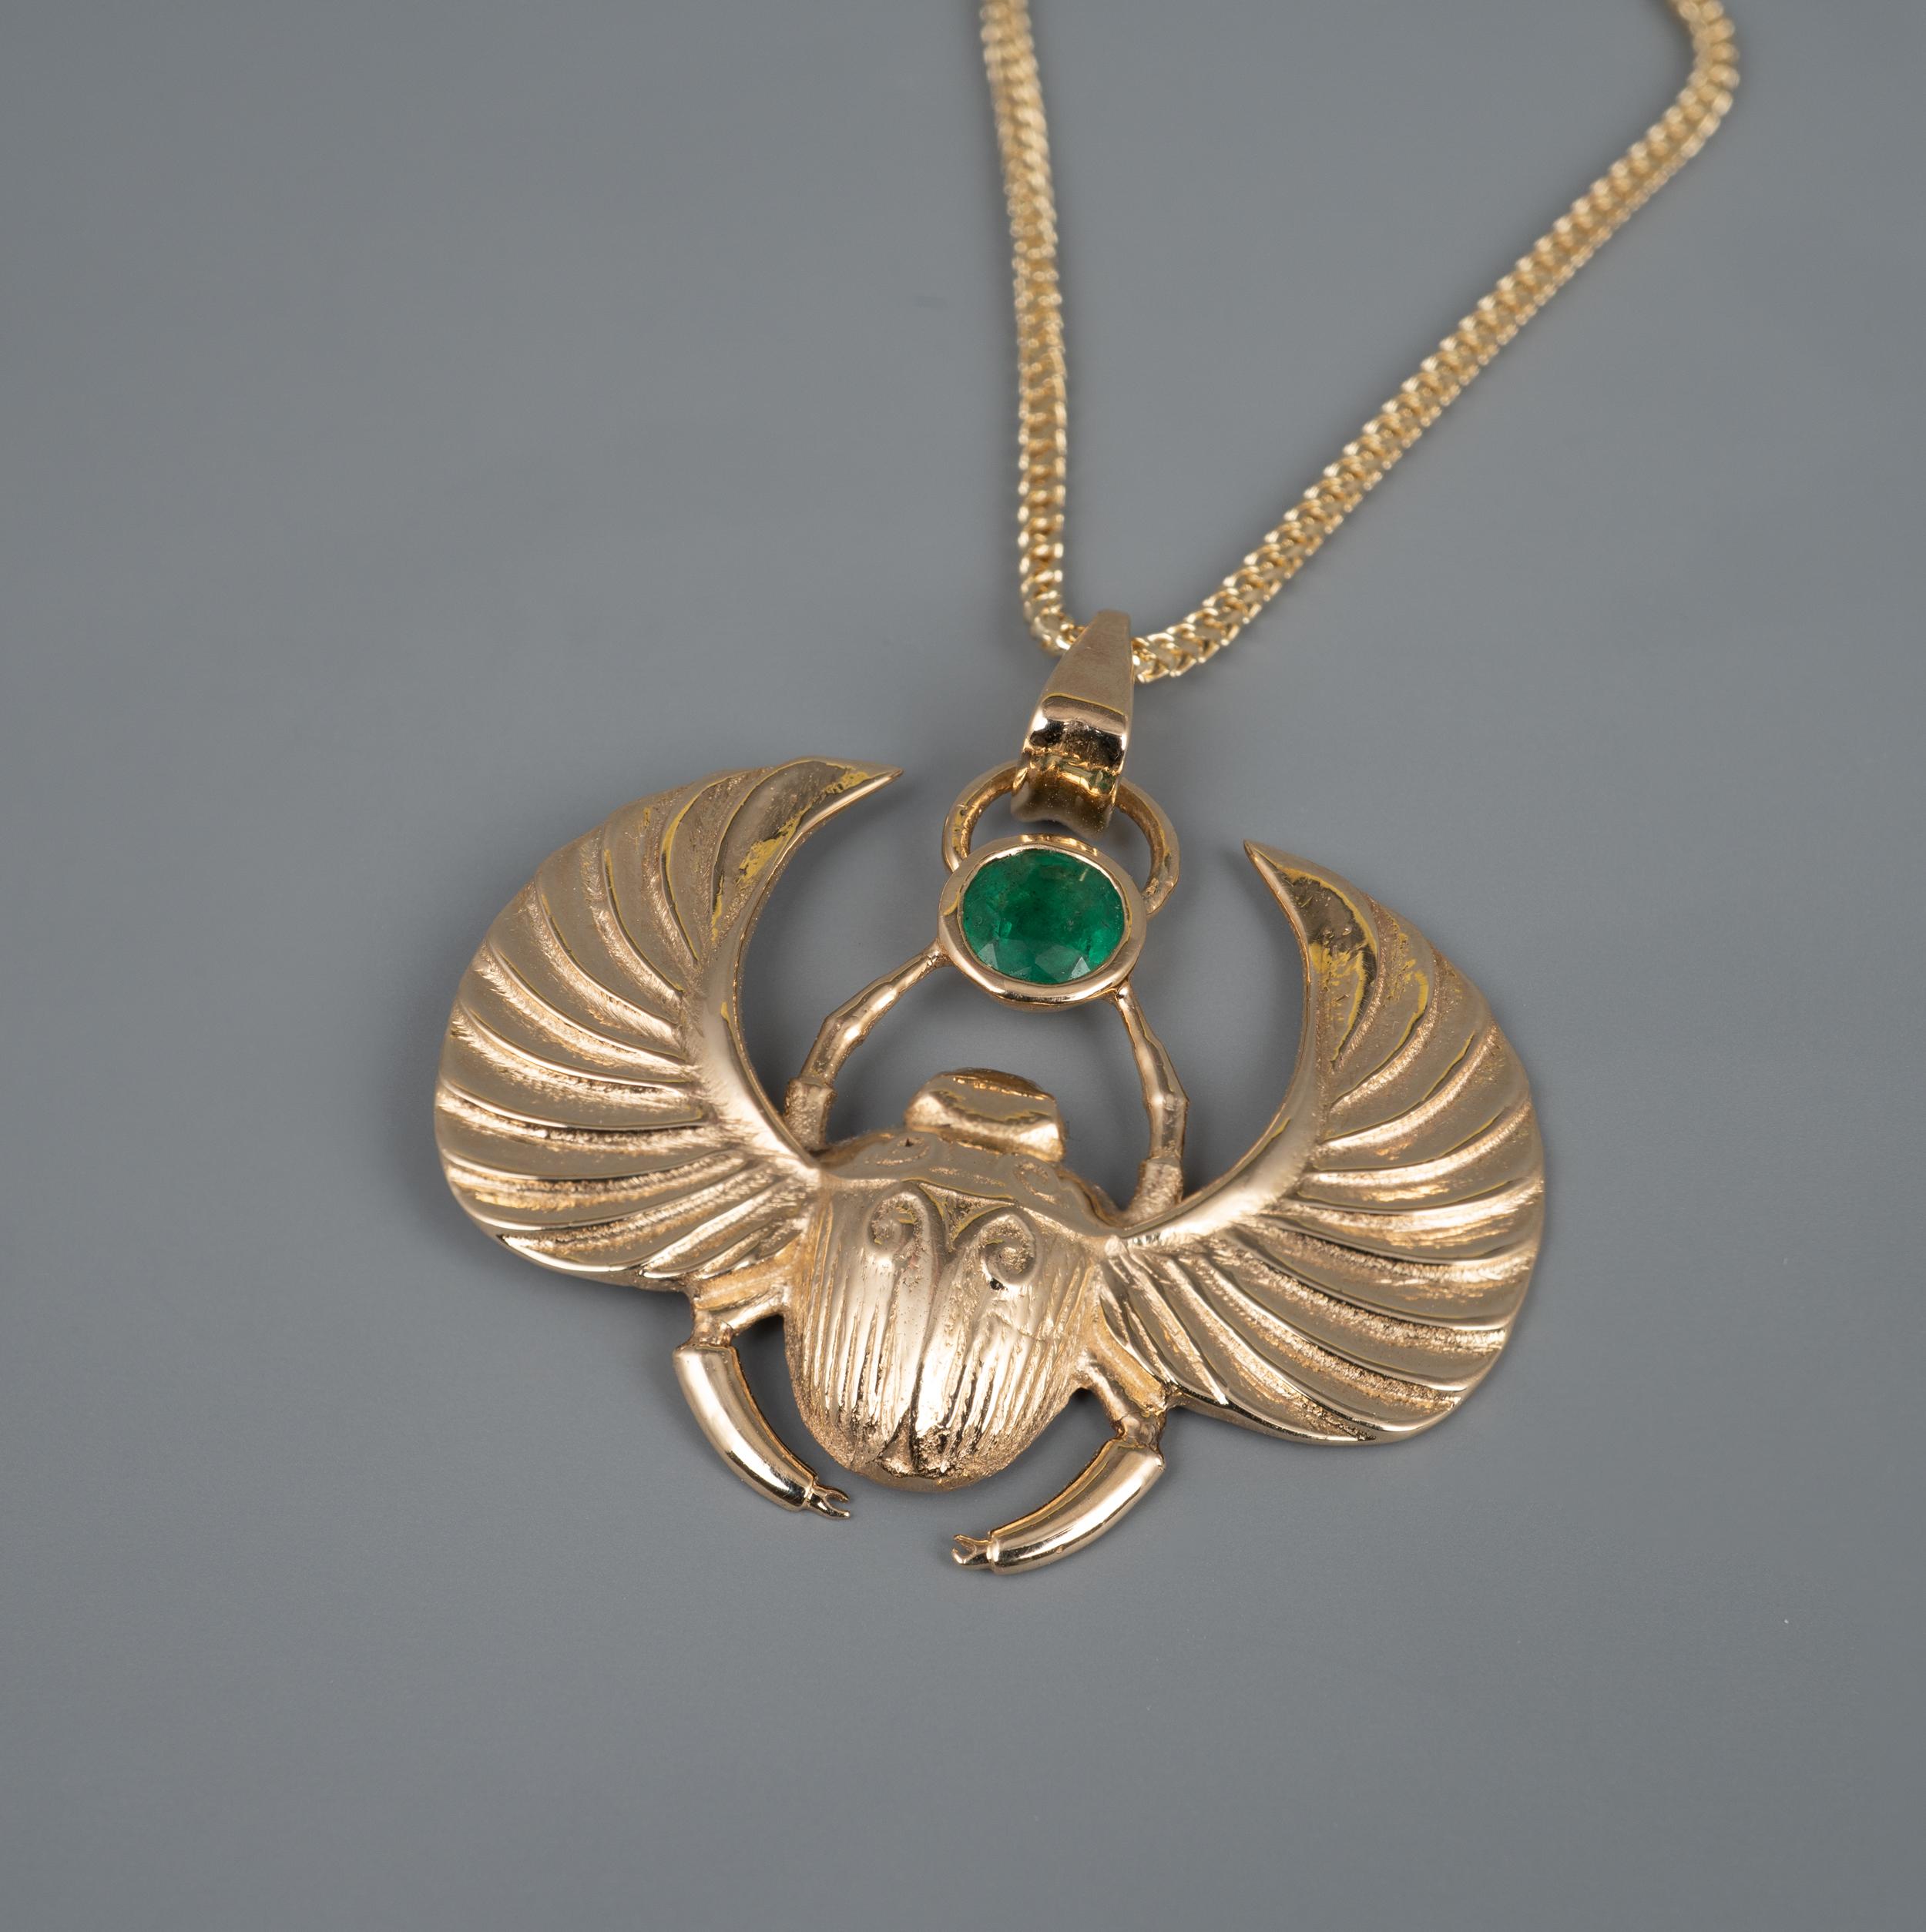 This Egyptian revival Winged Scarab Beetle pendant features a beautiful certified 0.41 carat round cut natural emerald gemstone. 

The custom made his piece displays full UK hallmarks and is expertly modelled with textured detail to the body and